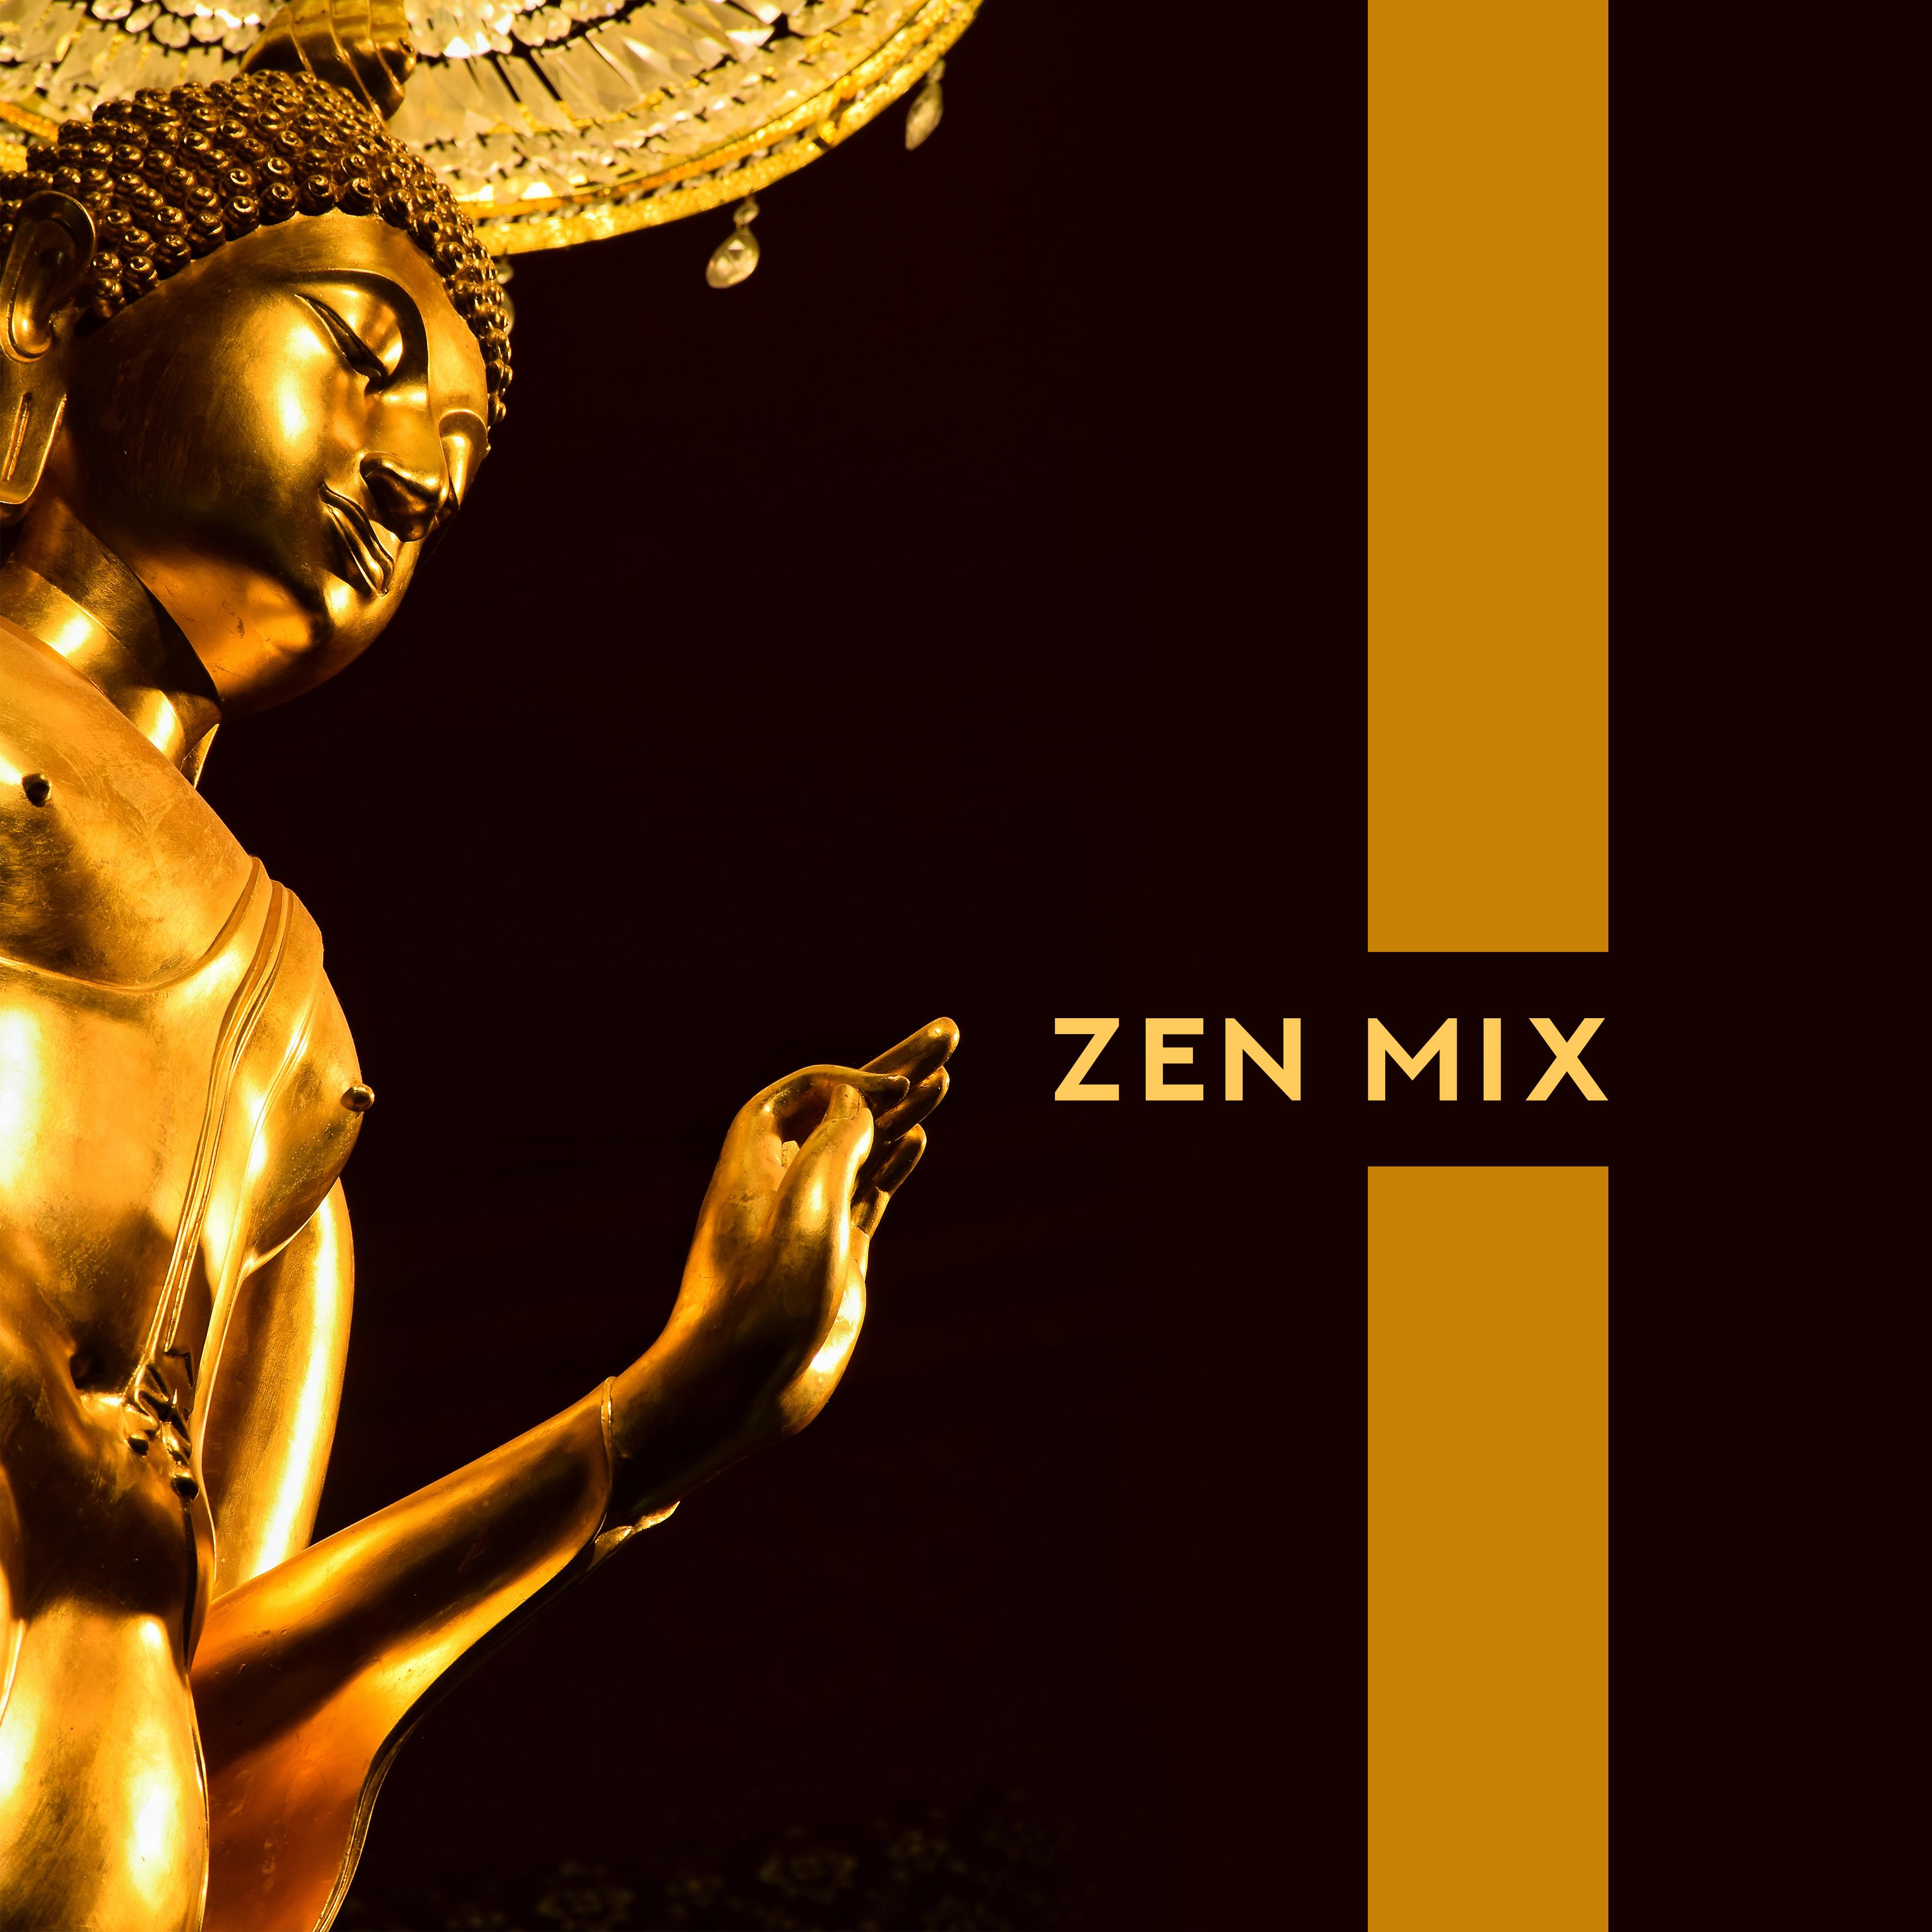 Zen Mix – Gentle Meditation Music, Reduce Stress, Music for Mind, Inner Harmony, Soothing Sounds to Calm Down, Healing Yoga, Sleep